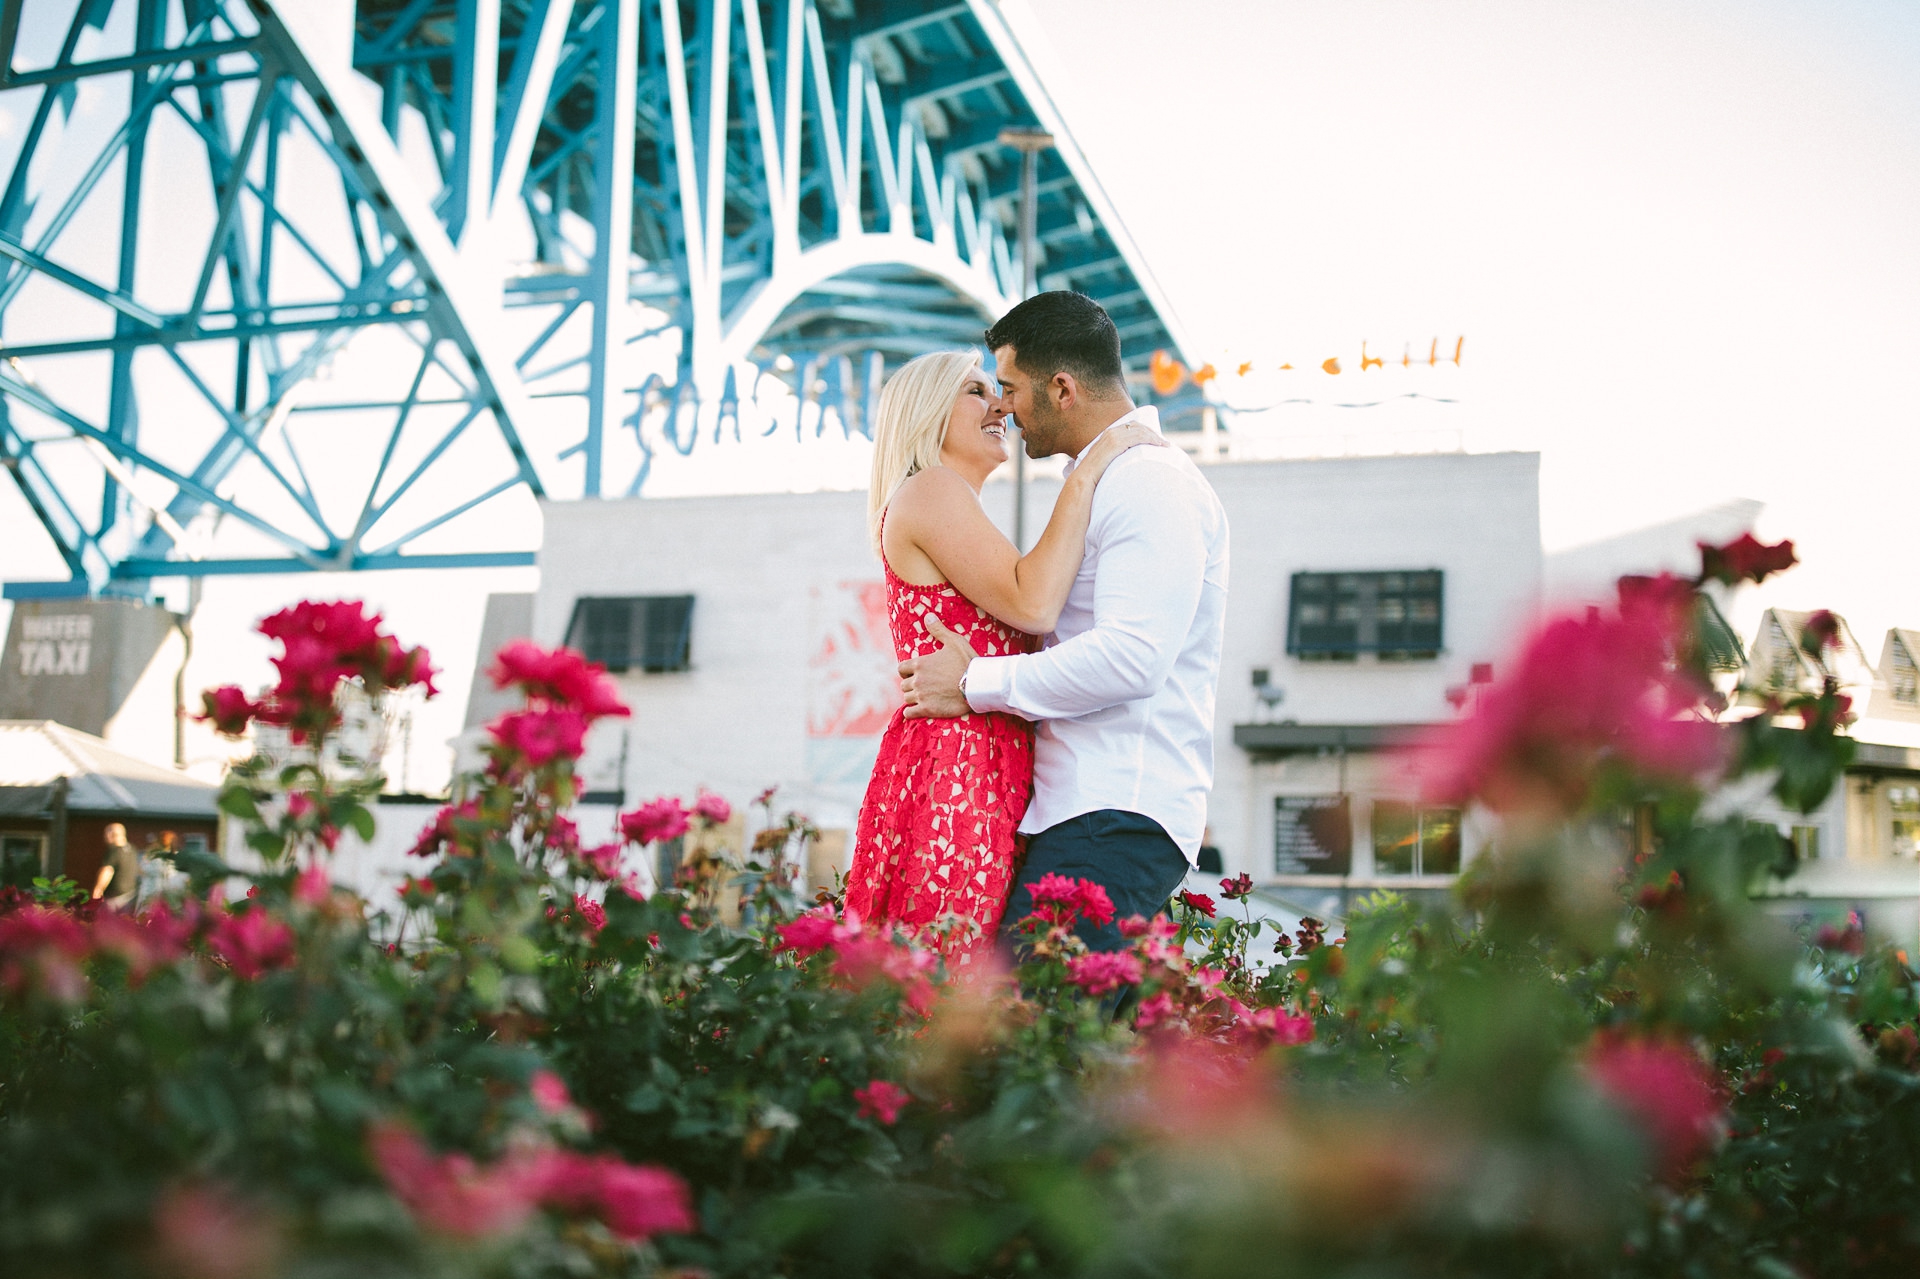 Sara Shookman Angelo DiFranco Engagement photos in cleveland by too much awesomeness photography 7.jpg